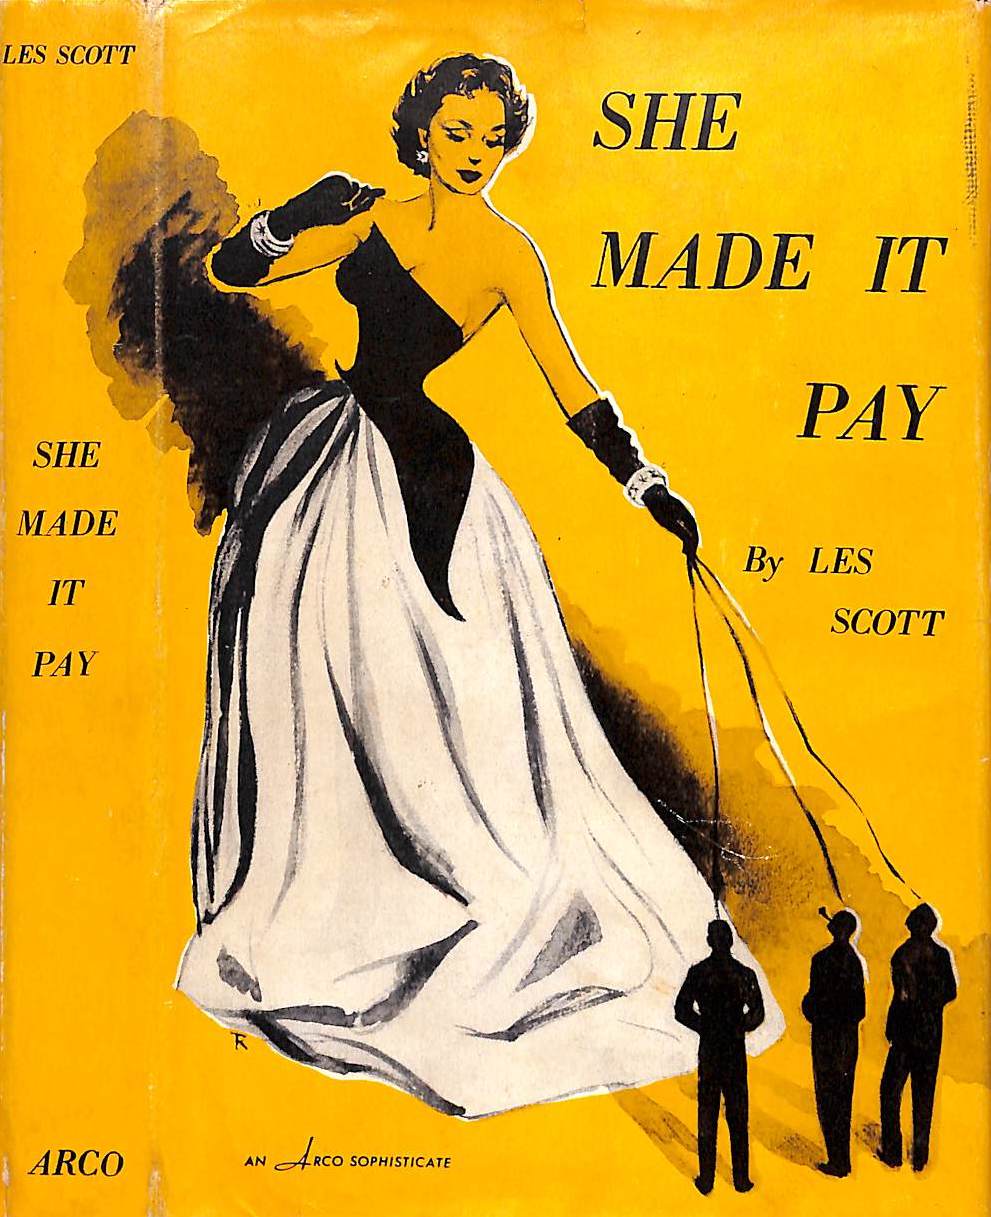 "She Made It Pay" 1952 SCOTT, Les